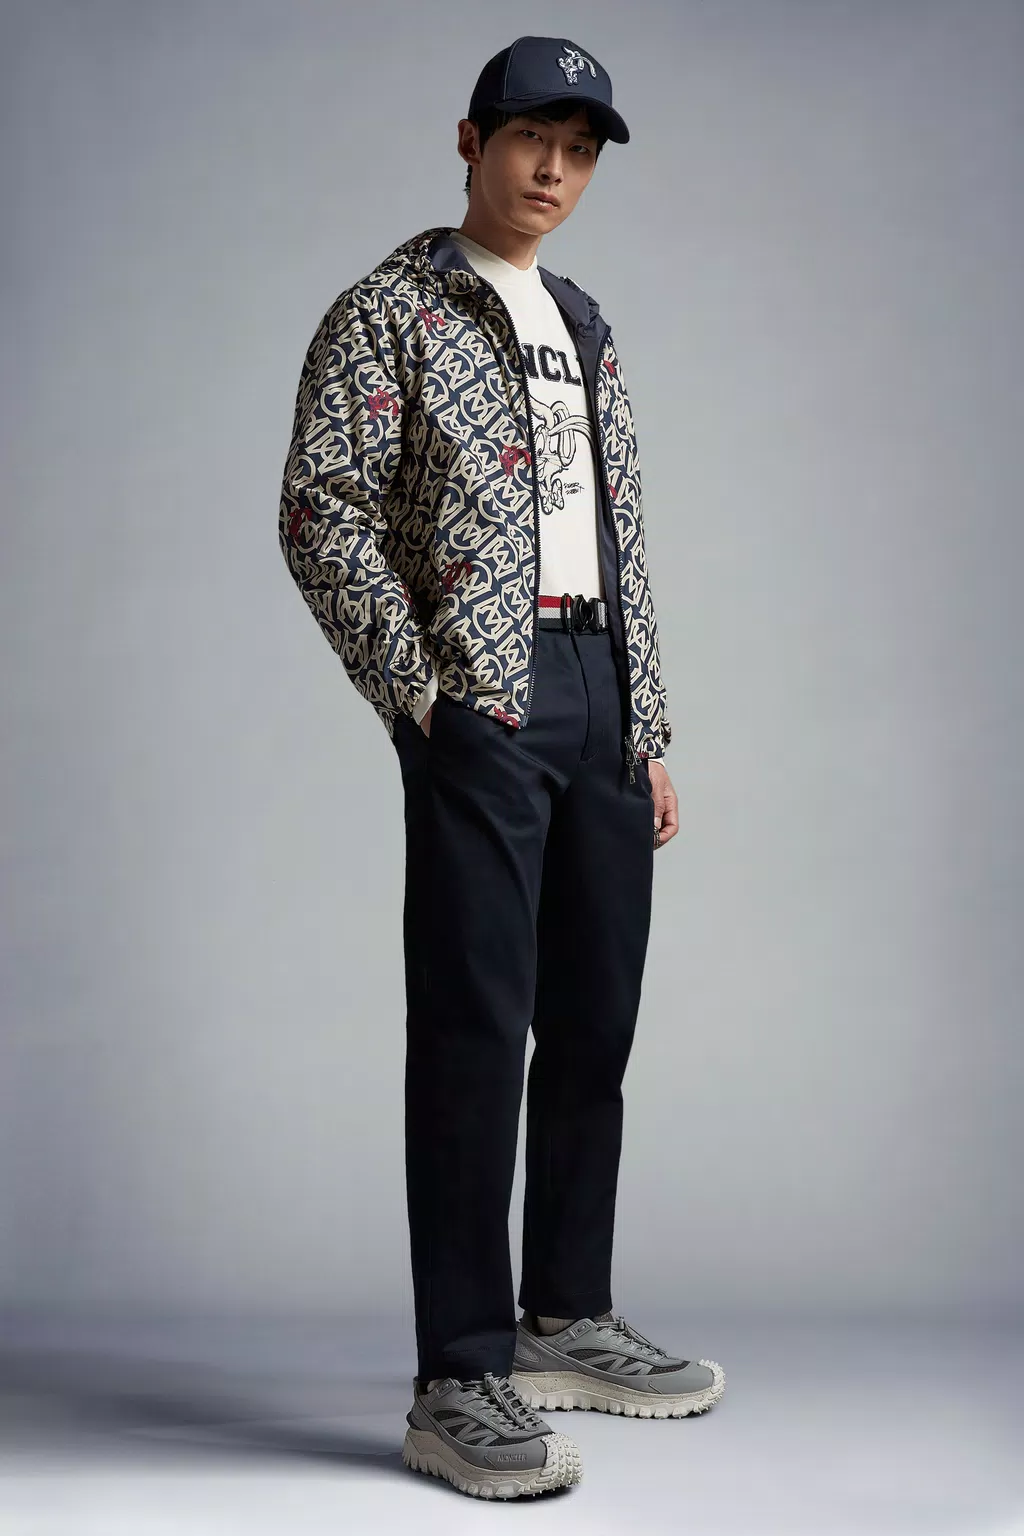 Image of a male model wearing the following Moncler items: a baseball cap with a bunny motif, a white T-shirt with a bunny motif, a printed blue and white zip up sweater with bunnies throughout, navy blue trousers and grey sneakers.